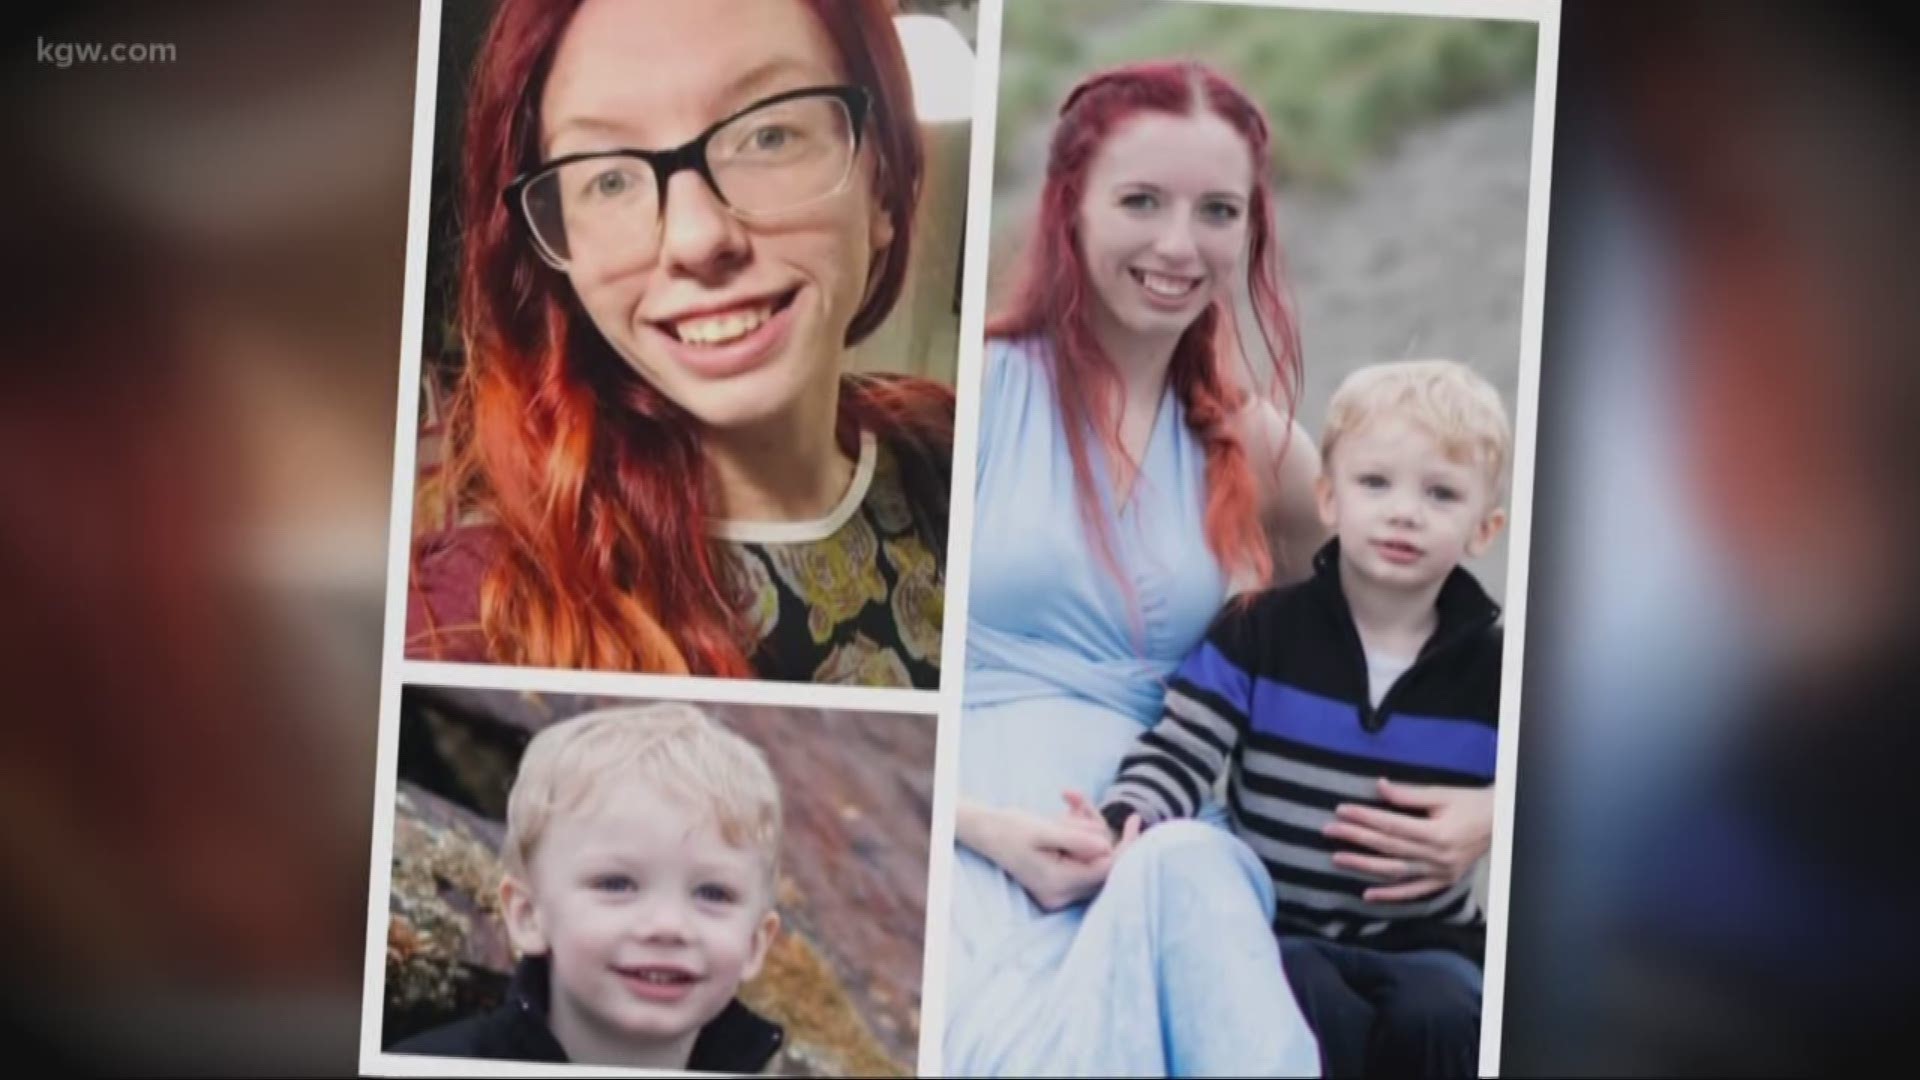 The Yamhill County District Attorney says there is enough evidence to confirm that a missing Salem mother and her son were killed.